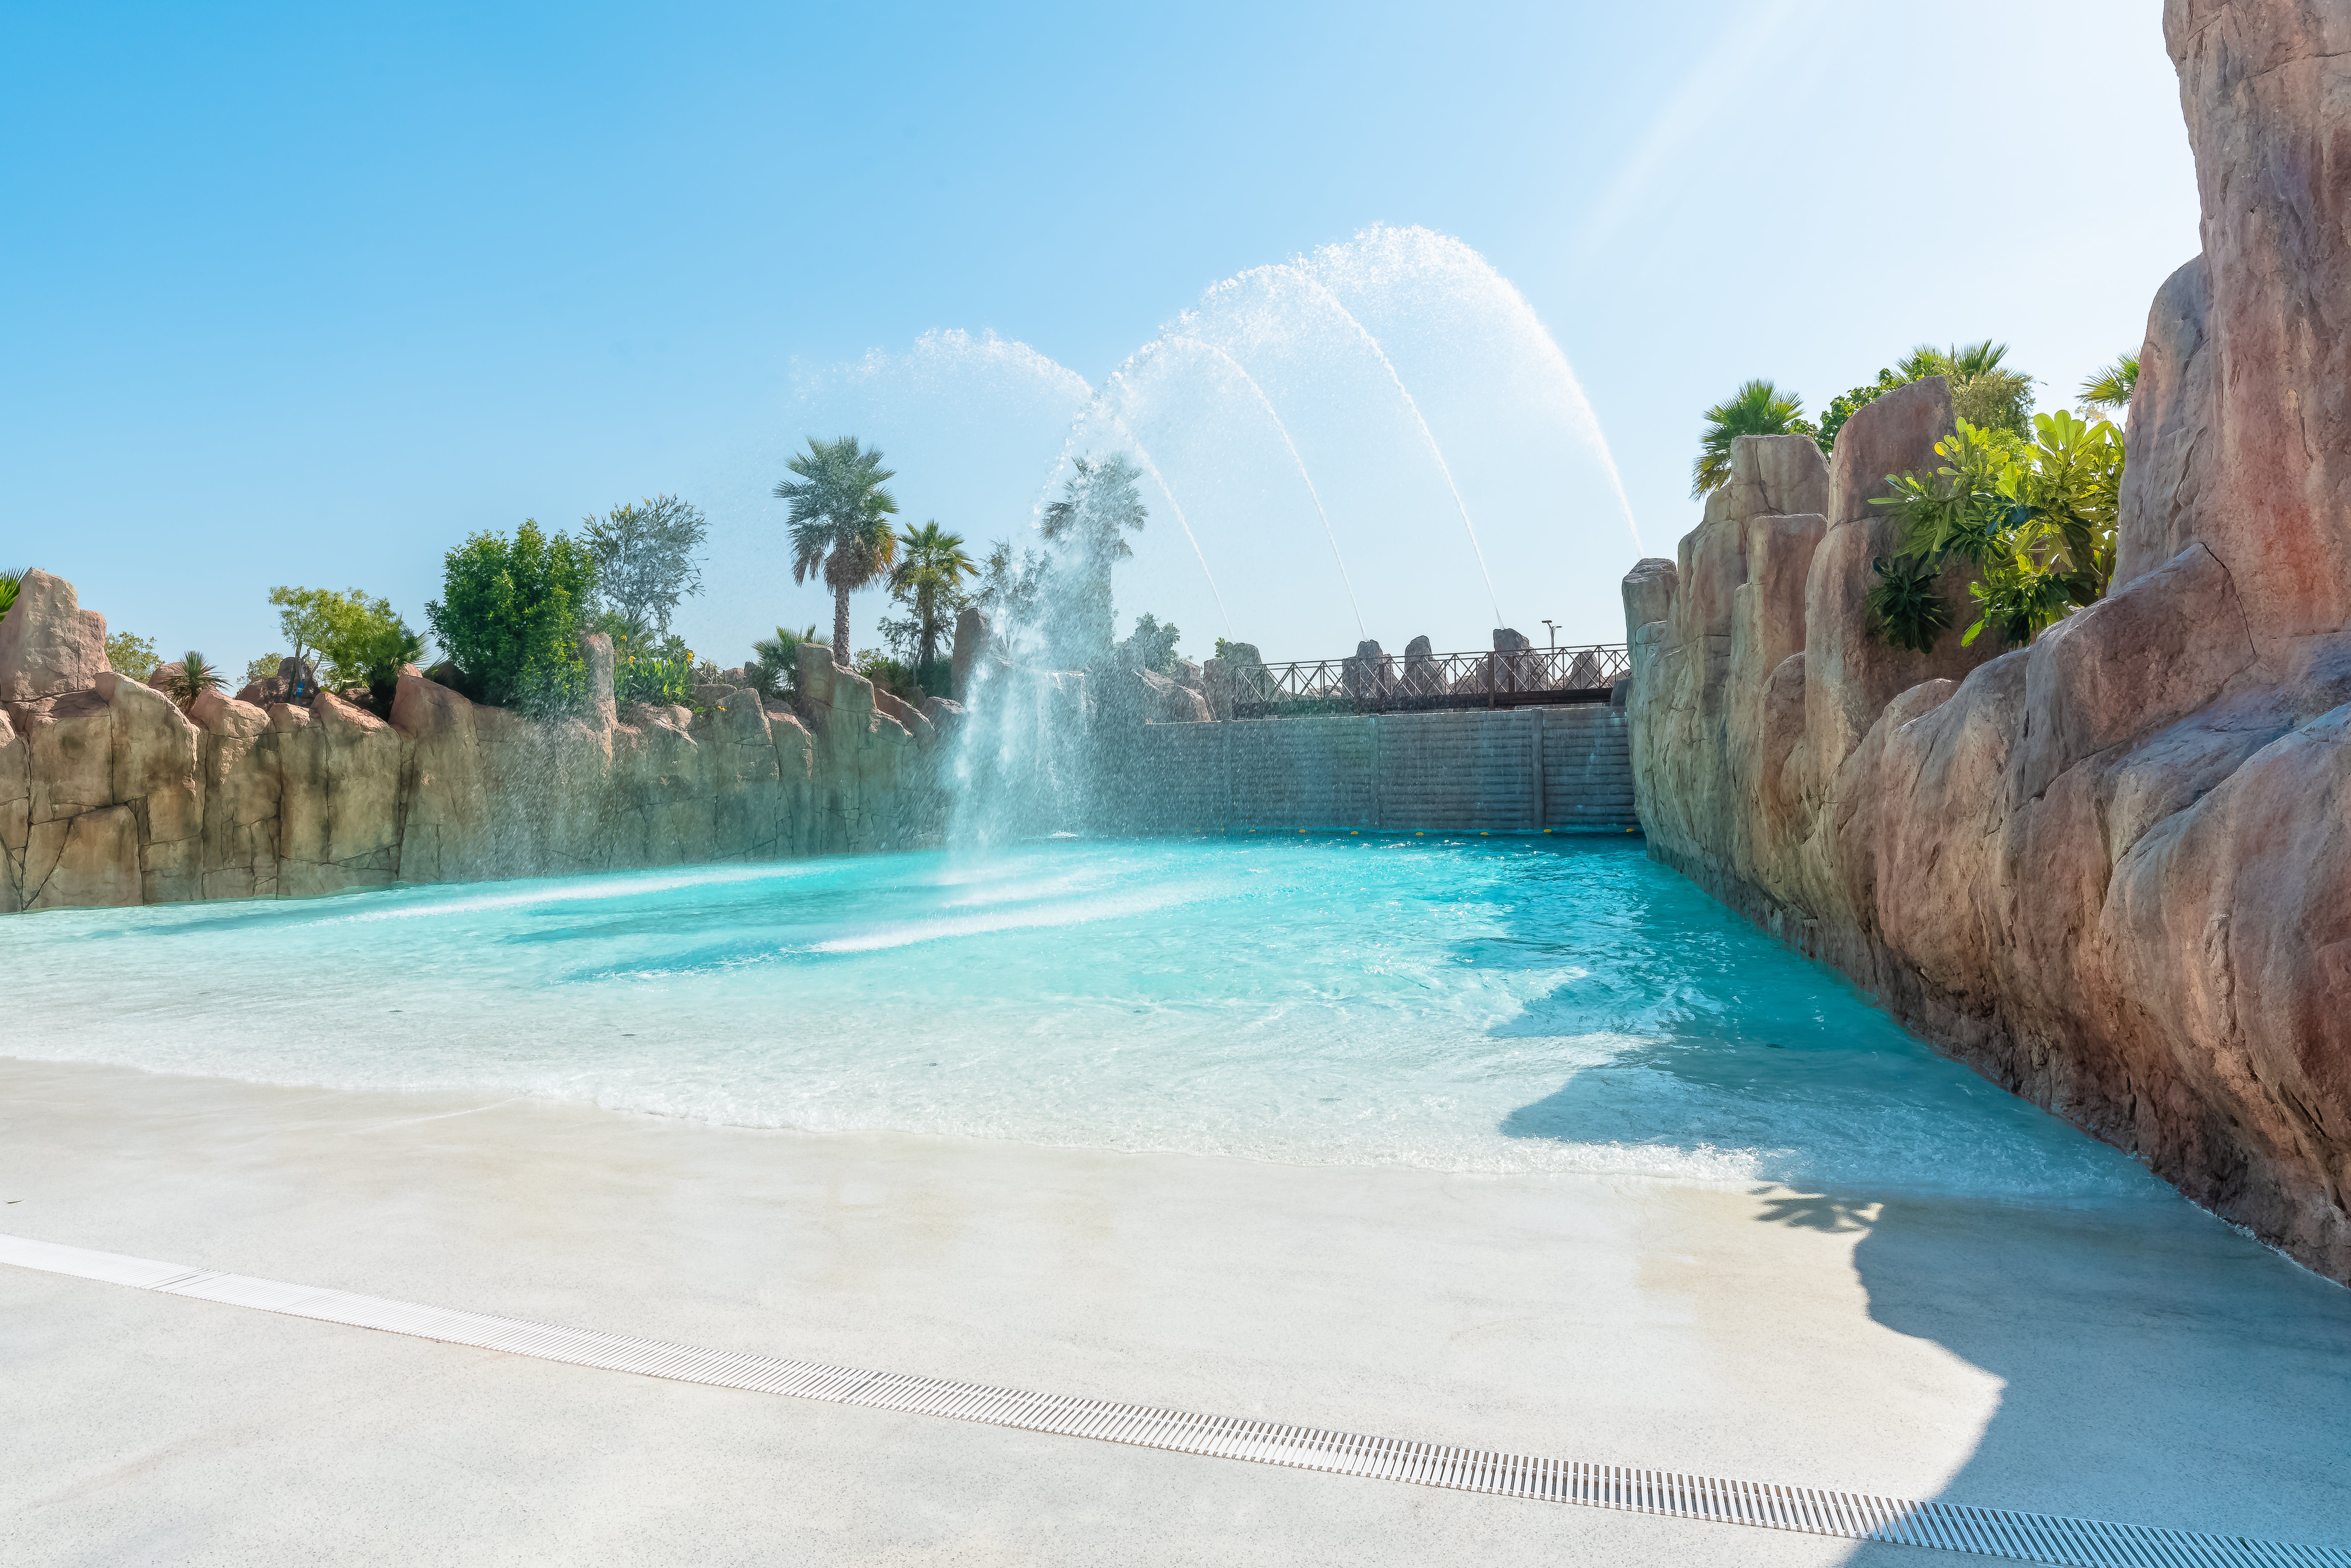 From the stunning wave pool to the on-site spa, there are plenty of places to pamper yourself